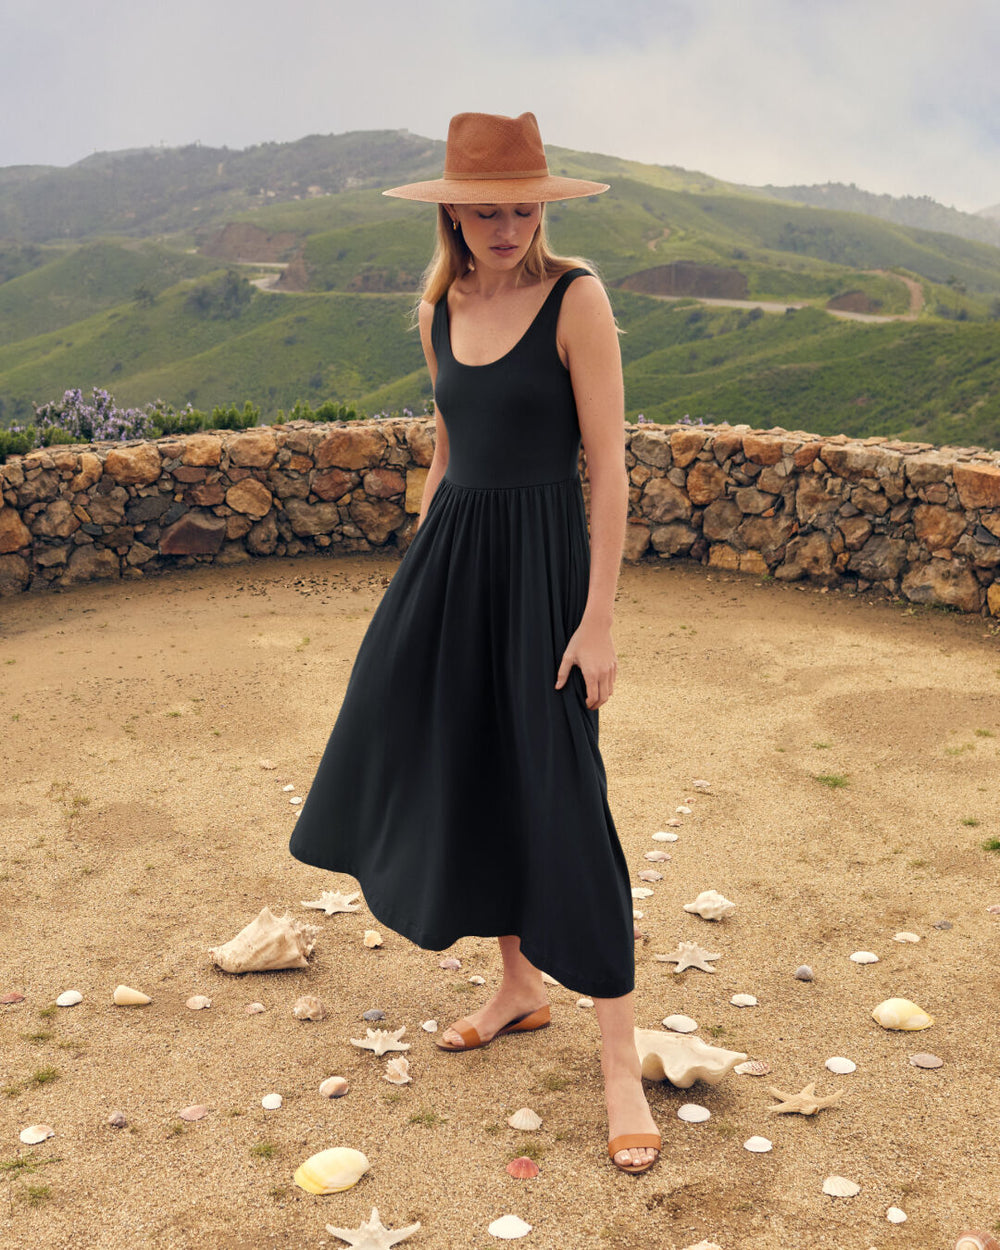 Woman in a dress and hat standing outdoors with scattered shells around her.